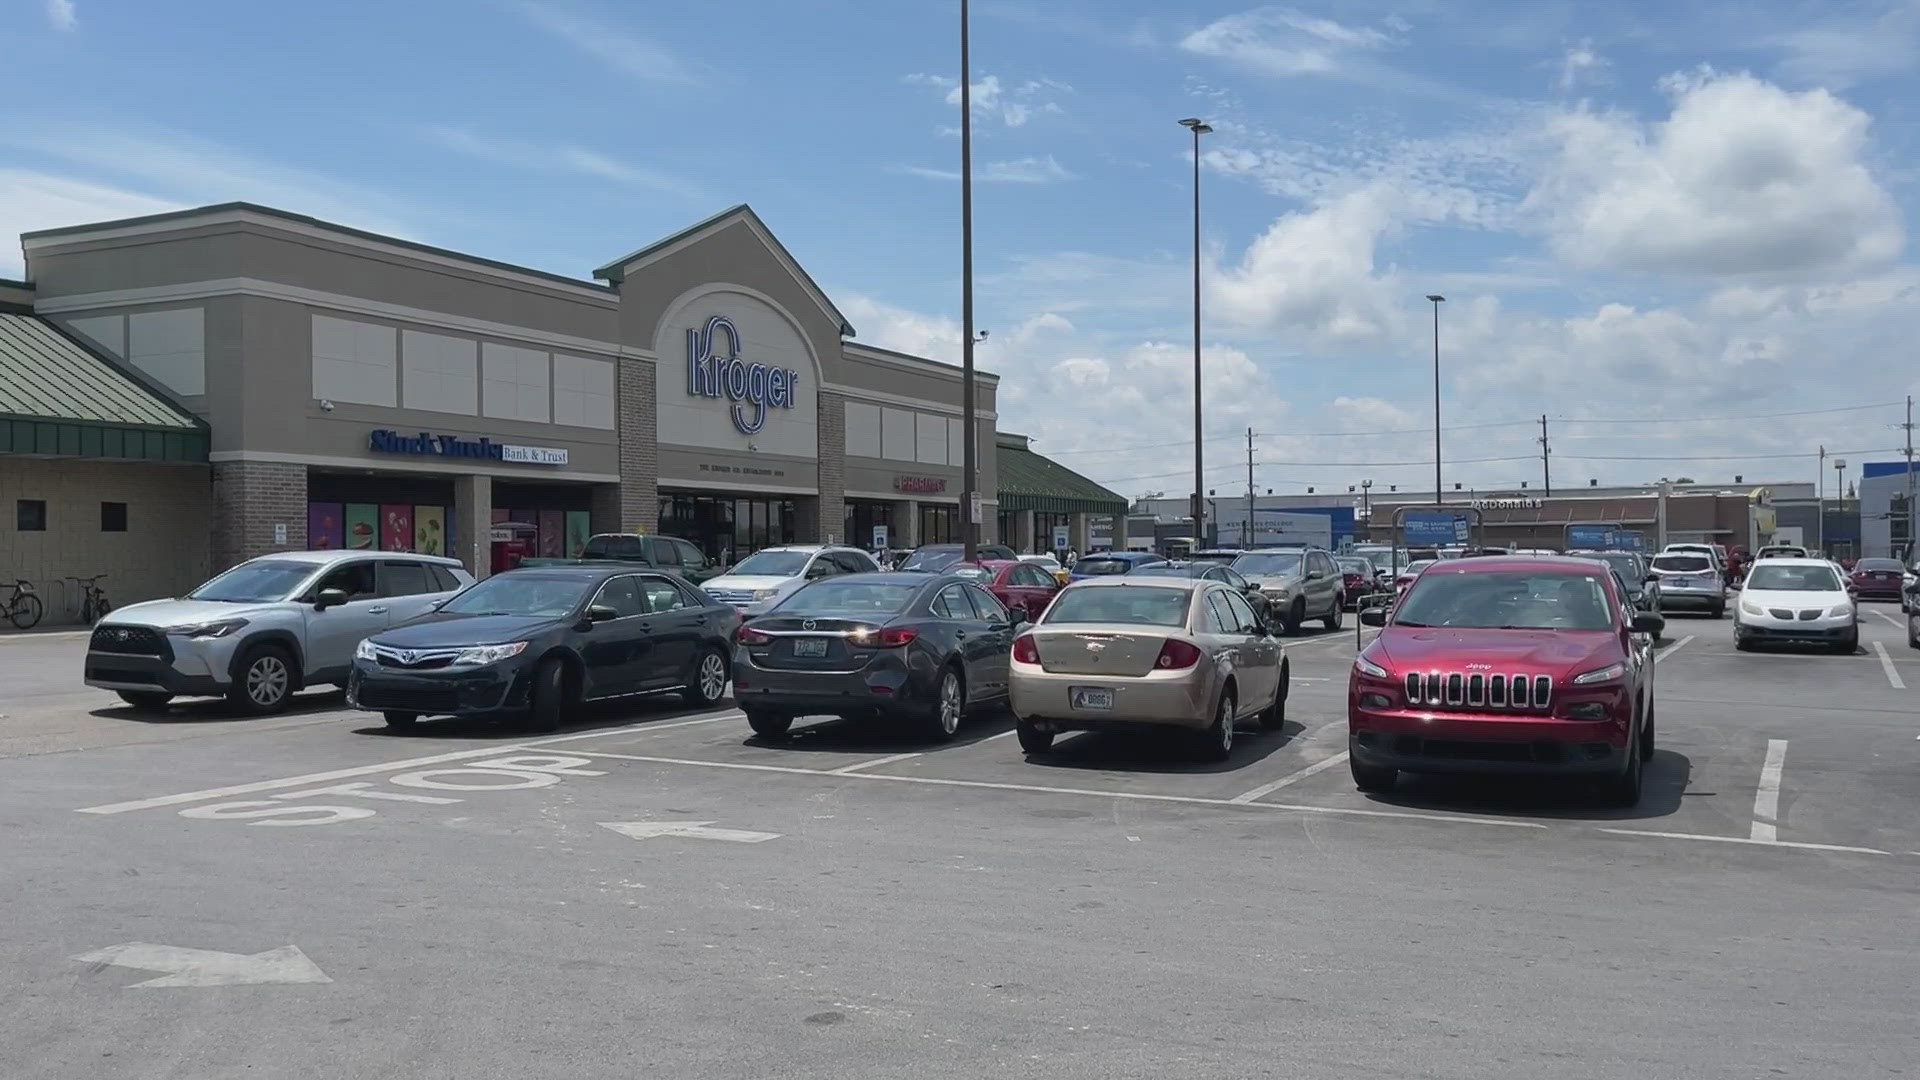 Metro Council members said they have heard the community's concerns and hope to partner with the grocery store for more accessible hours and services.